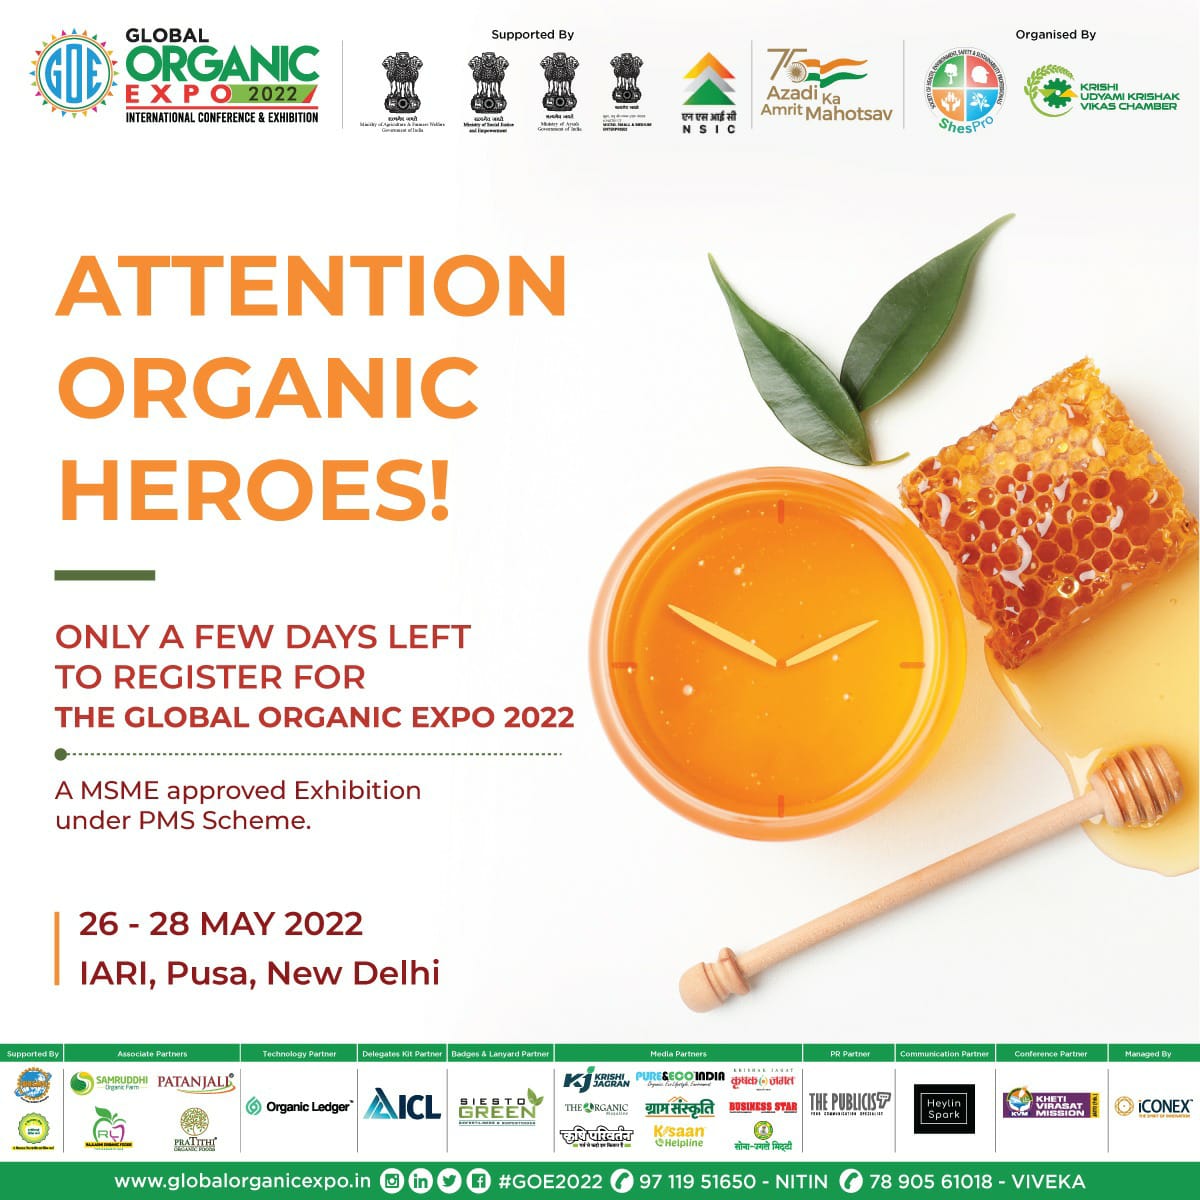 Global Organic Expo 2022 will bring Organic Revolution in India HBW